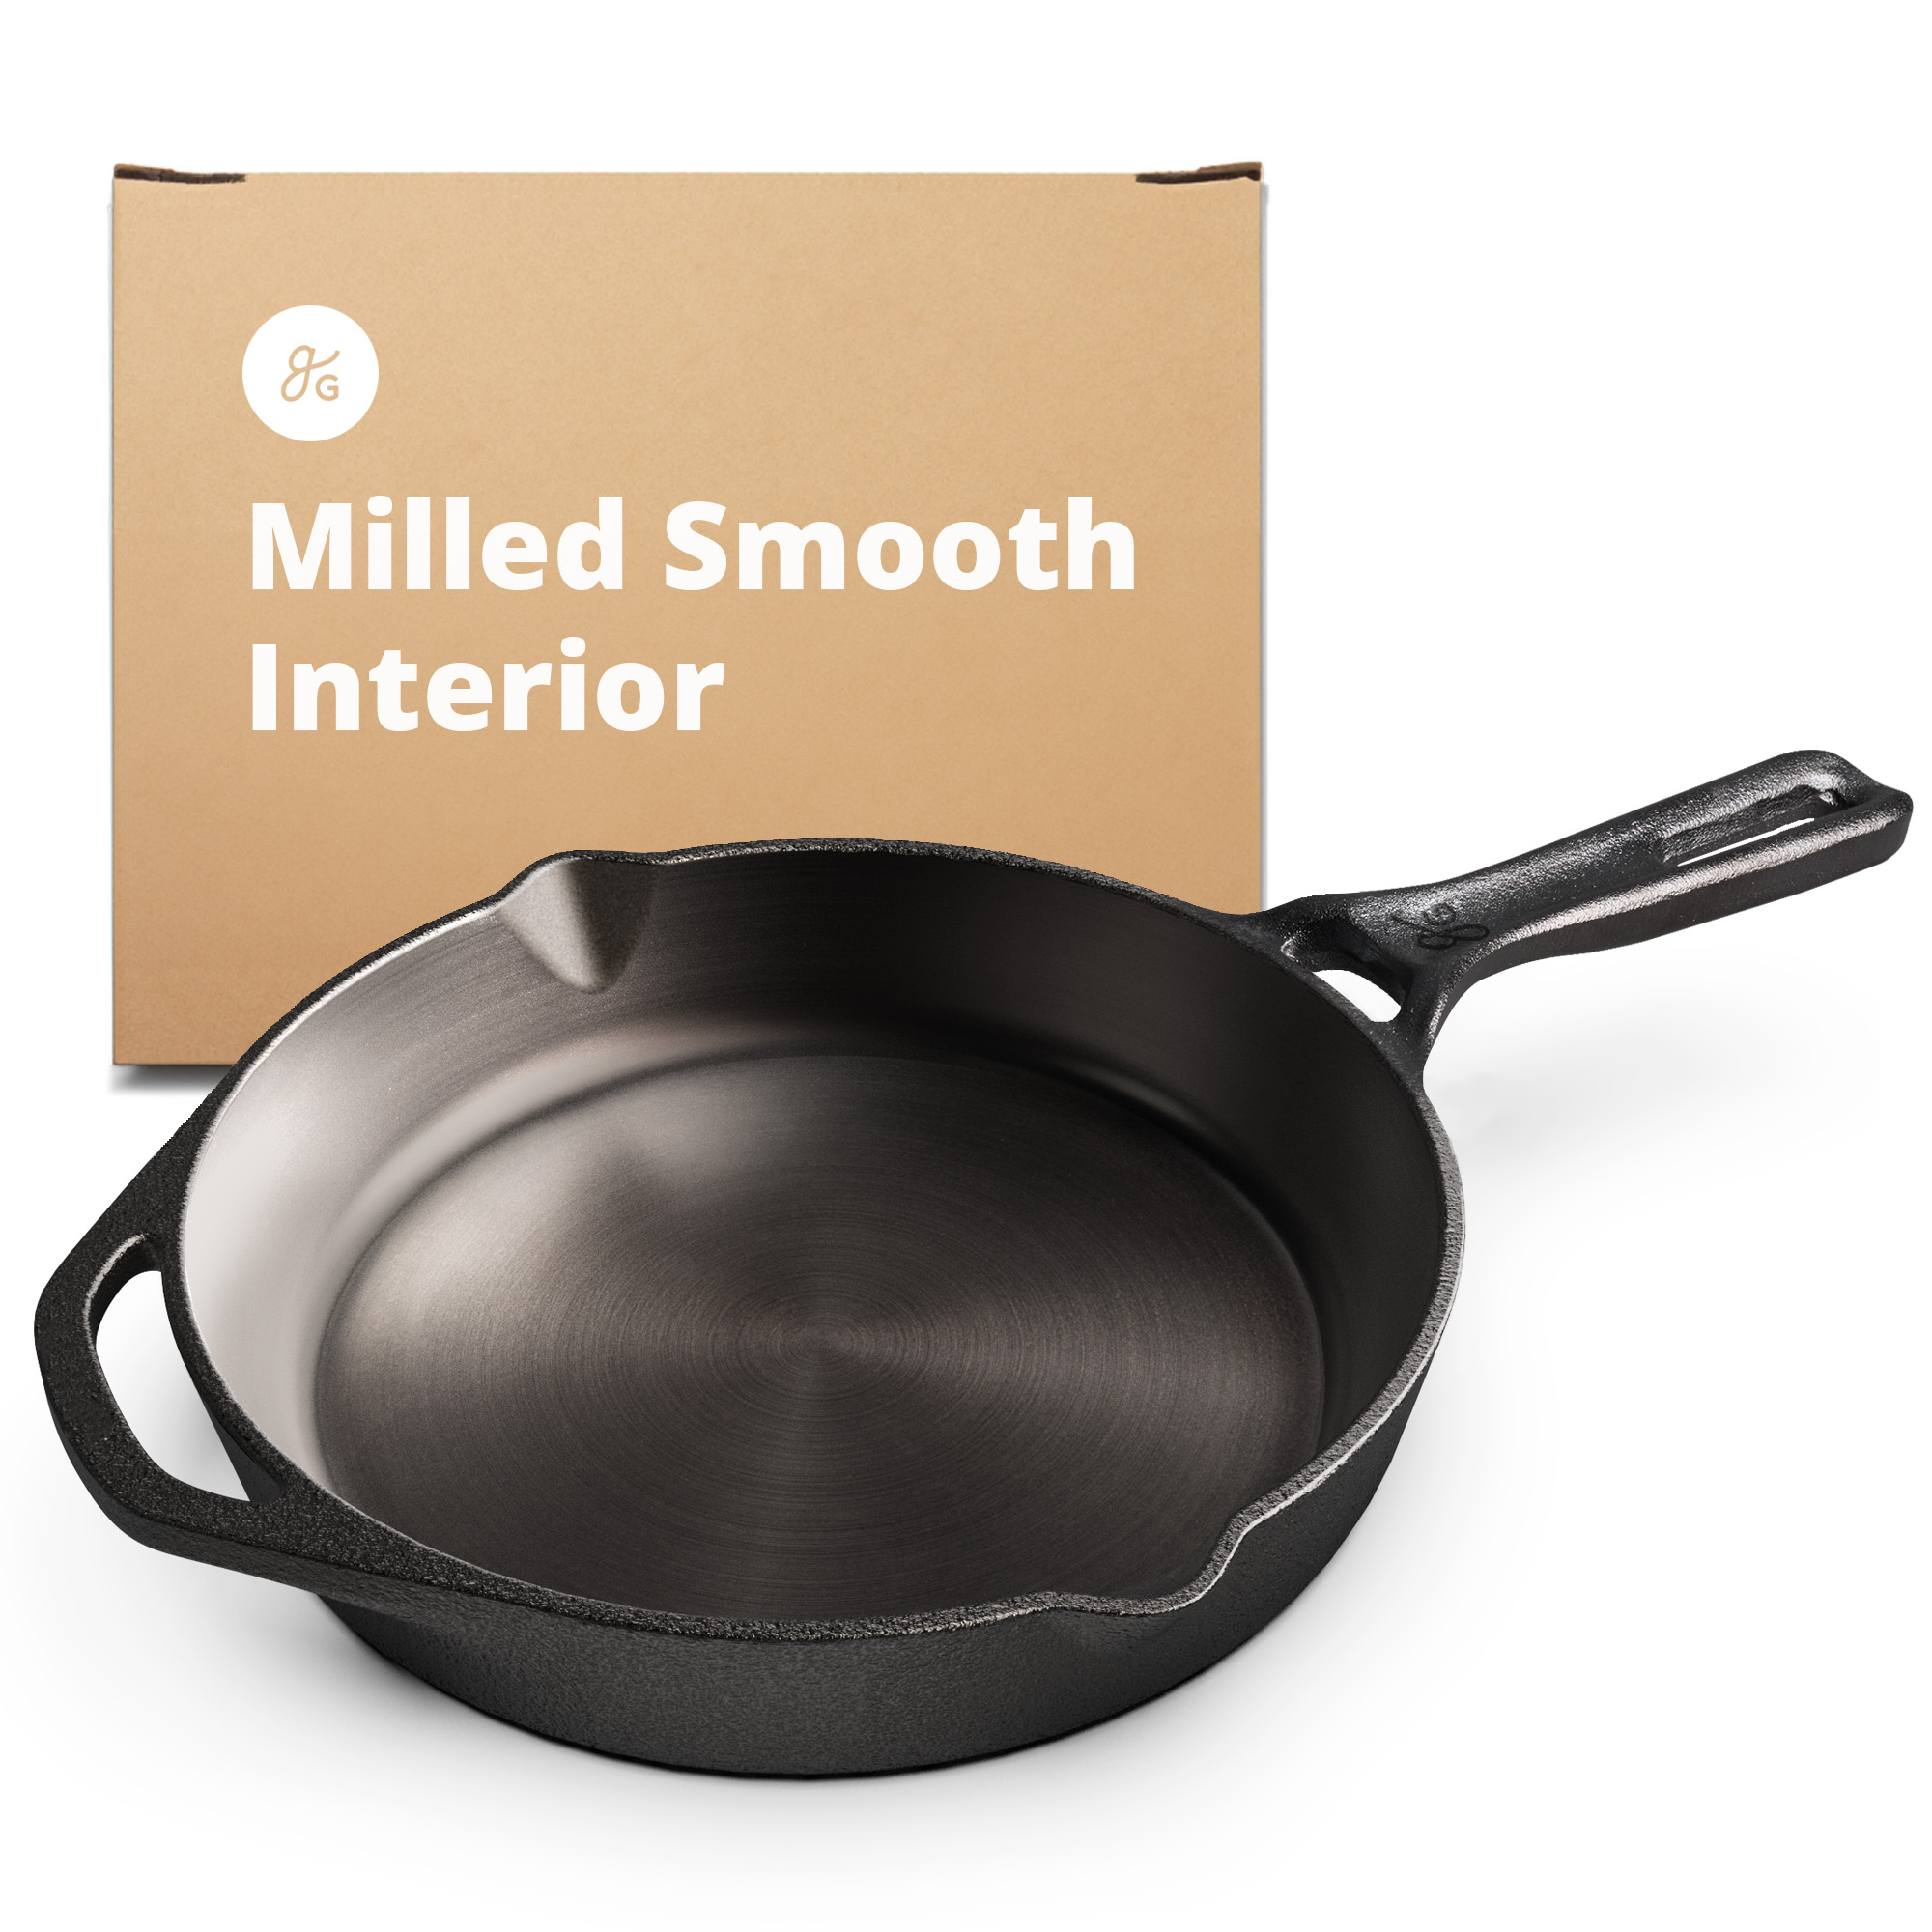 Greater Goods Cast Iron Skillet 10-Inch Pan, Cook Like a Pro with Smooth Milled, Organically Pre-Seasoned Skillet Surface, Designed in St. Louis - image 1 of 7